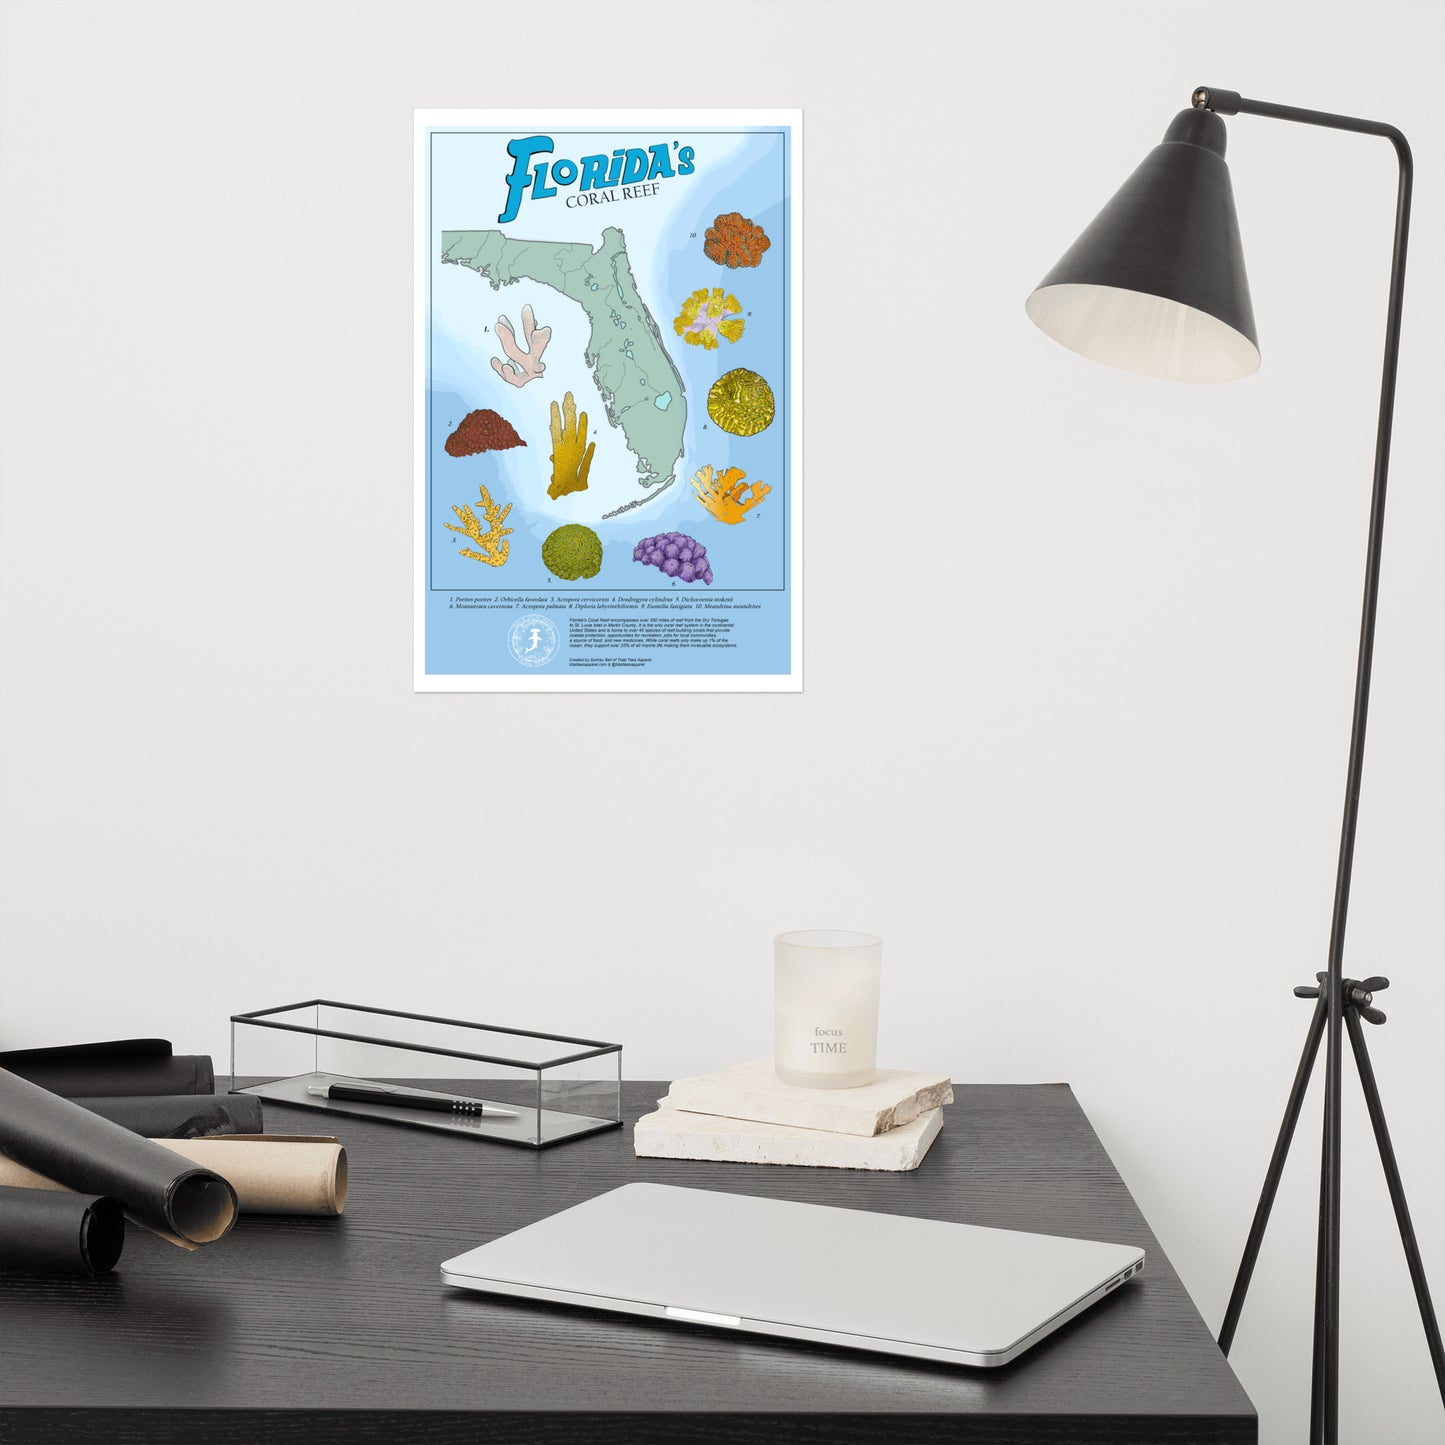 Florida's Coral Reef Poster